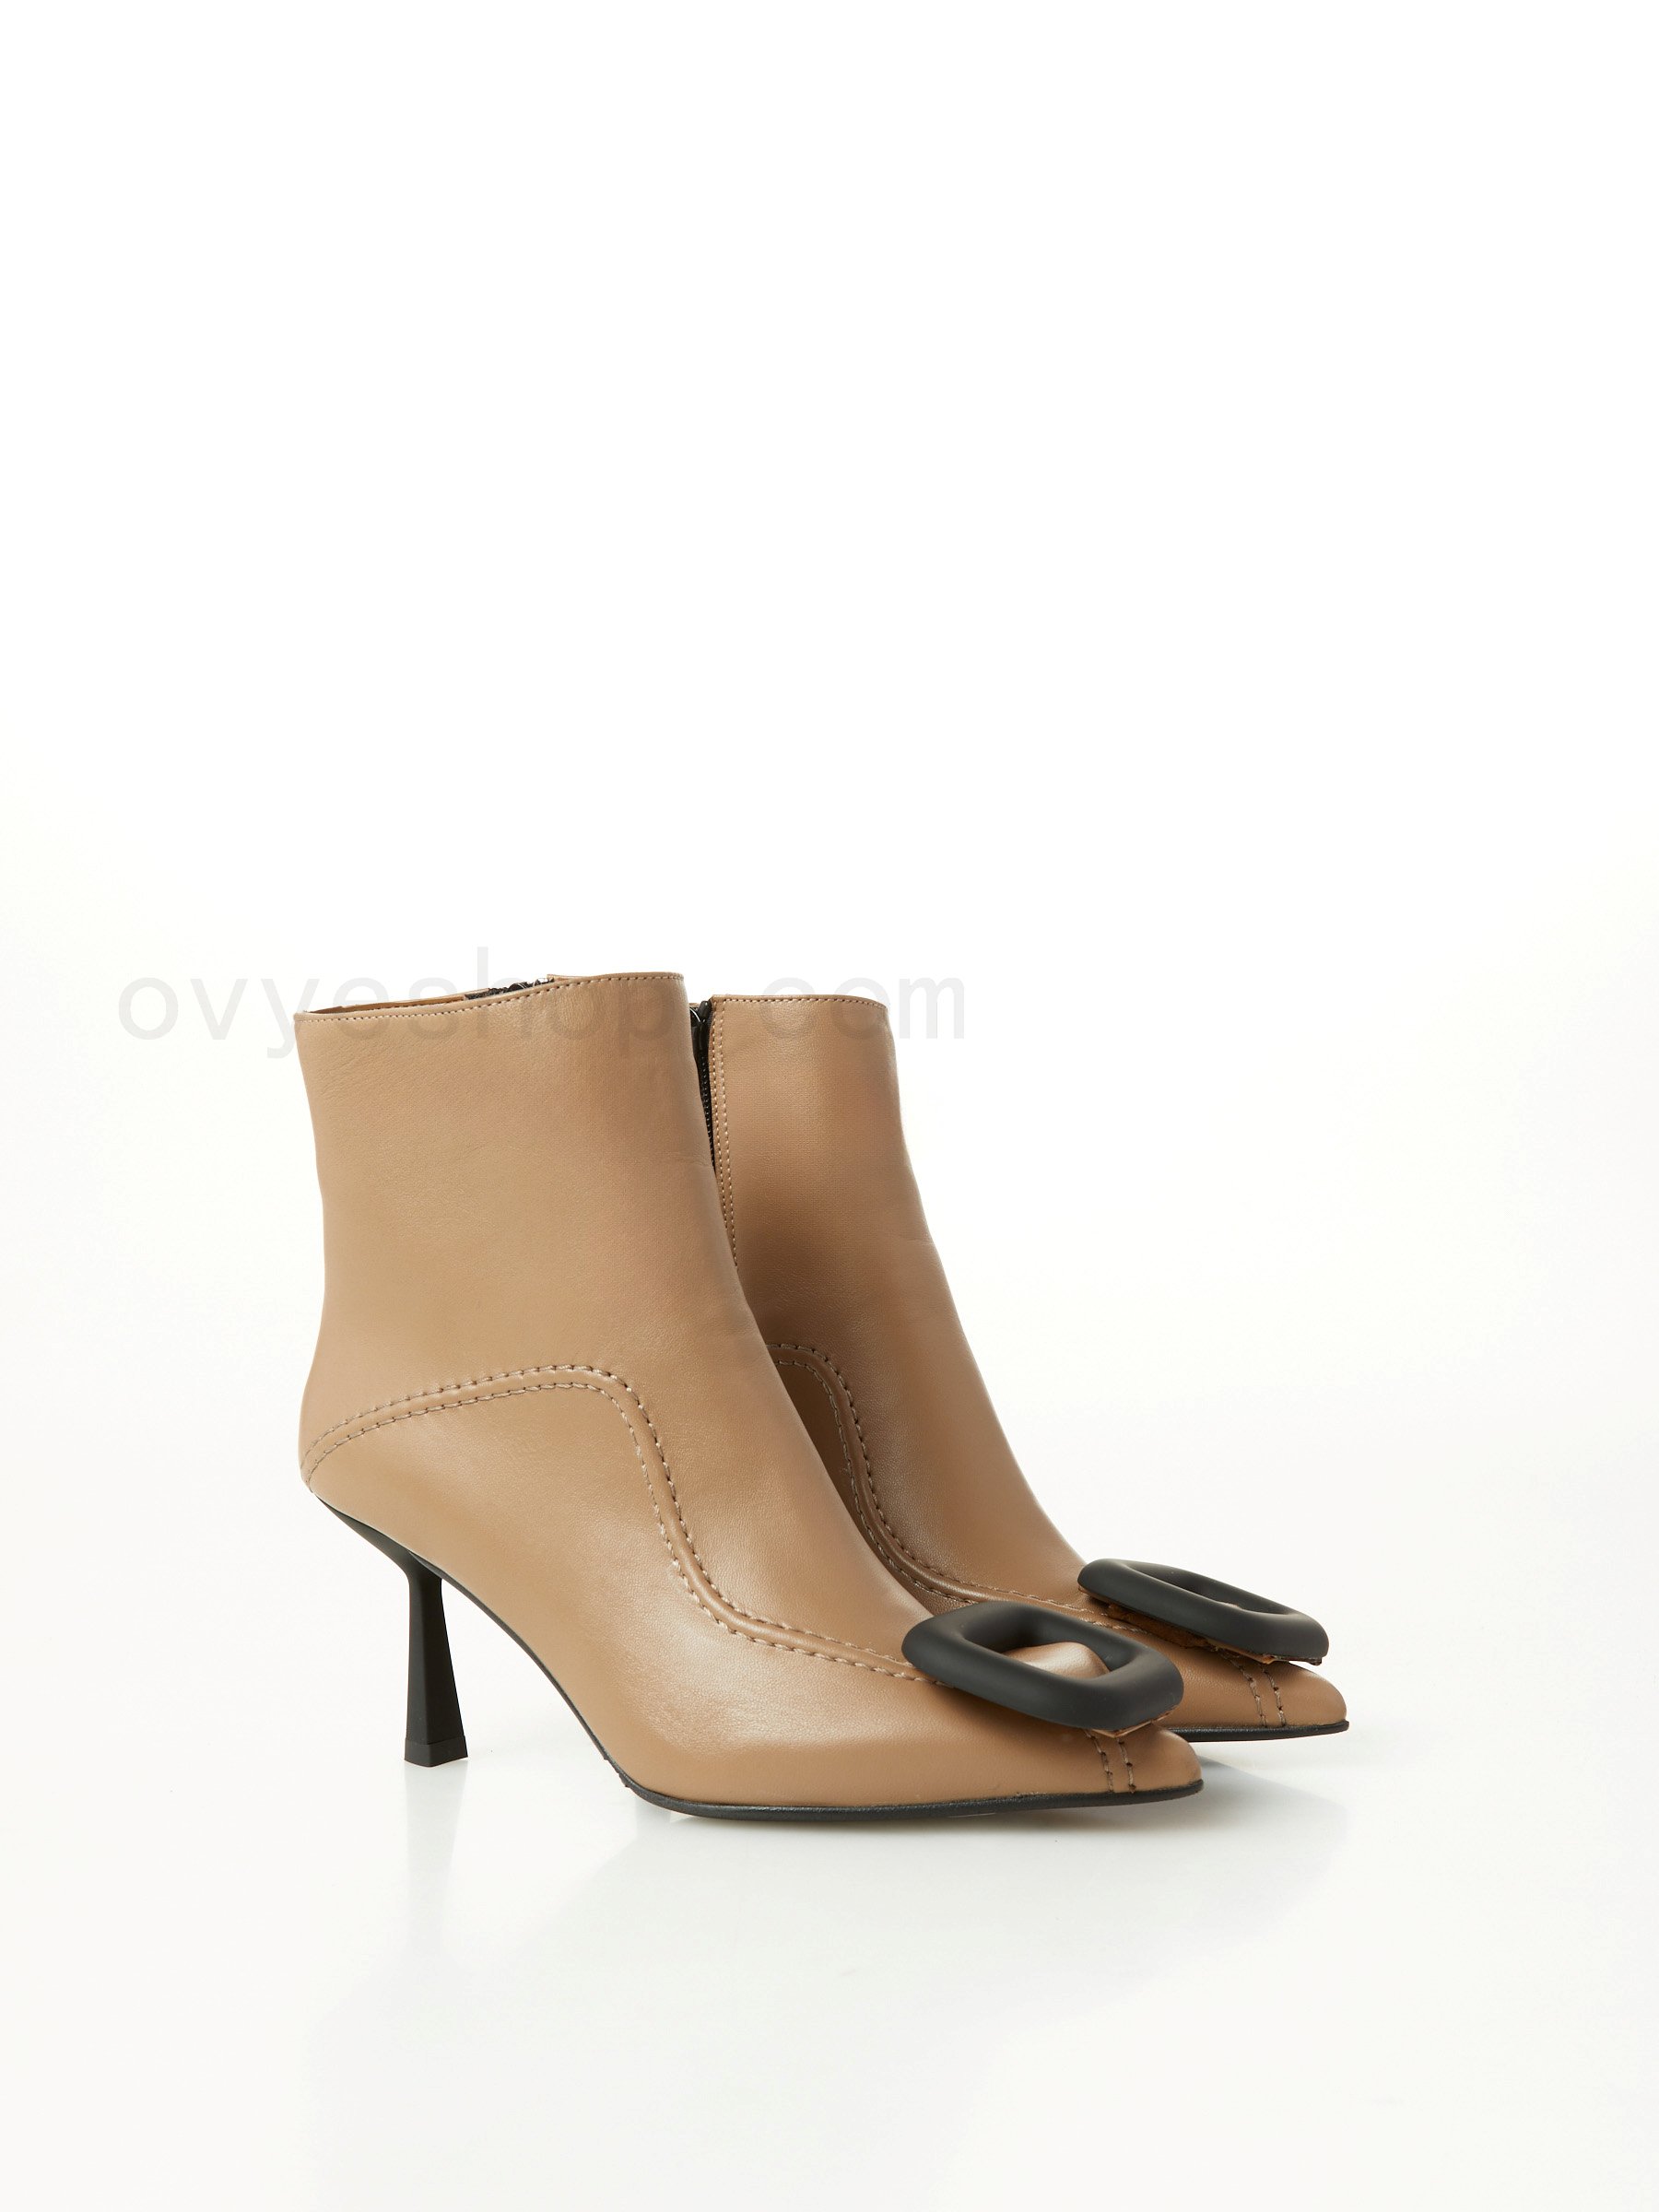 ovy&#232; shop online Leather Ankle Boot F0817885-0600 In Saldi